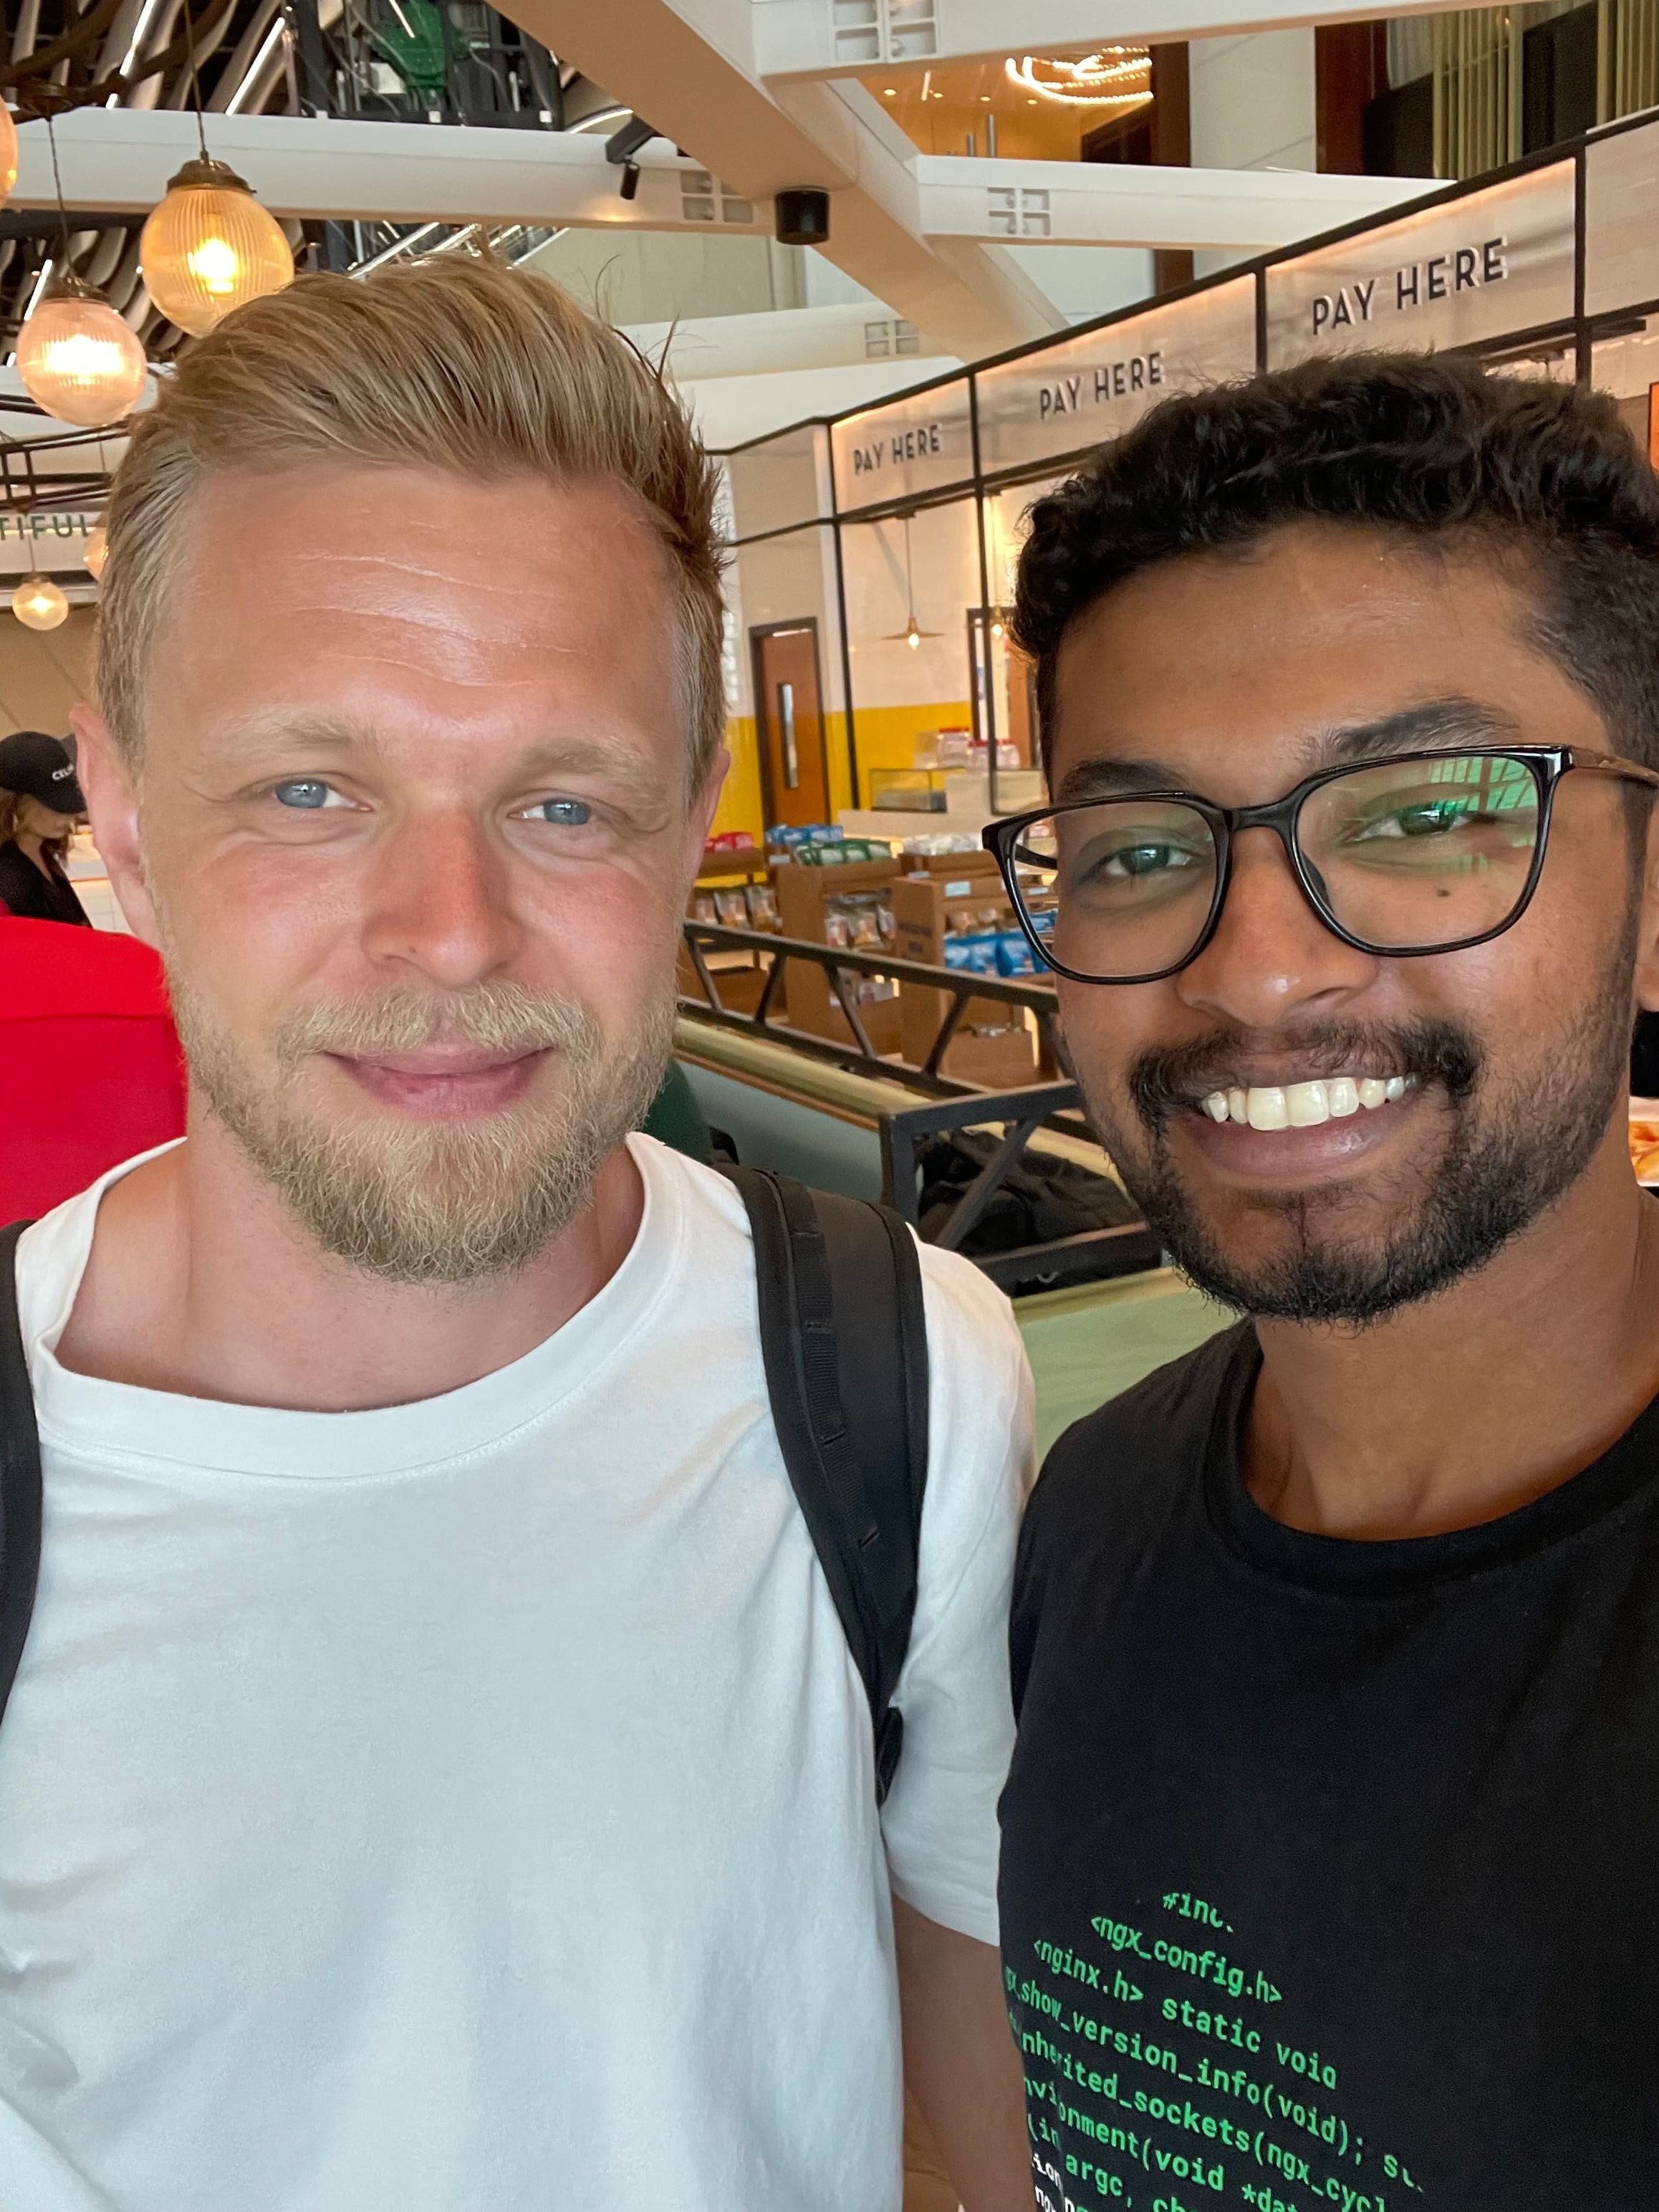 Ran into Kevin Magnussen at the airport. Best weekend made even better!